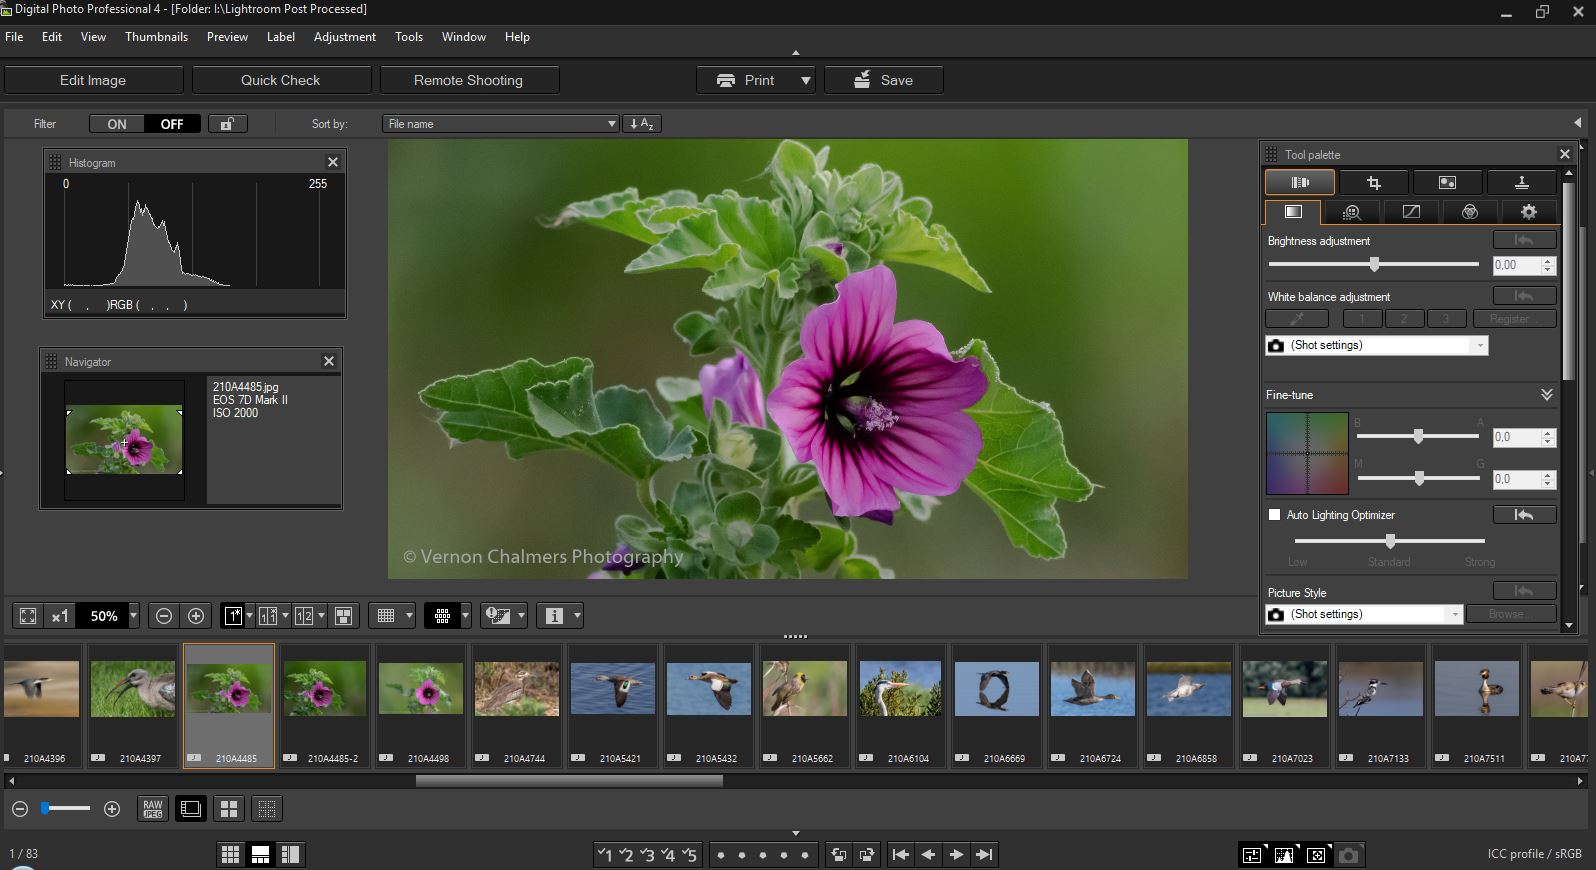 canon photo editor software download